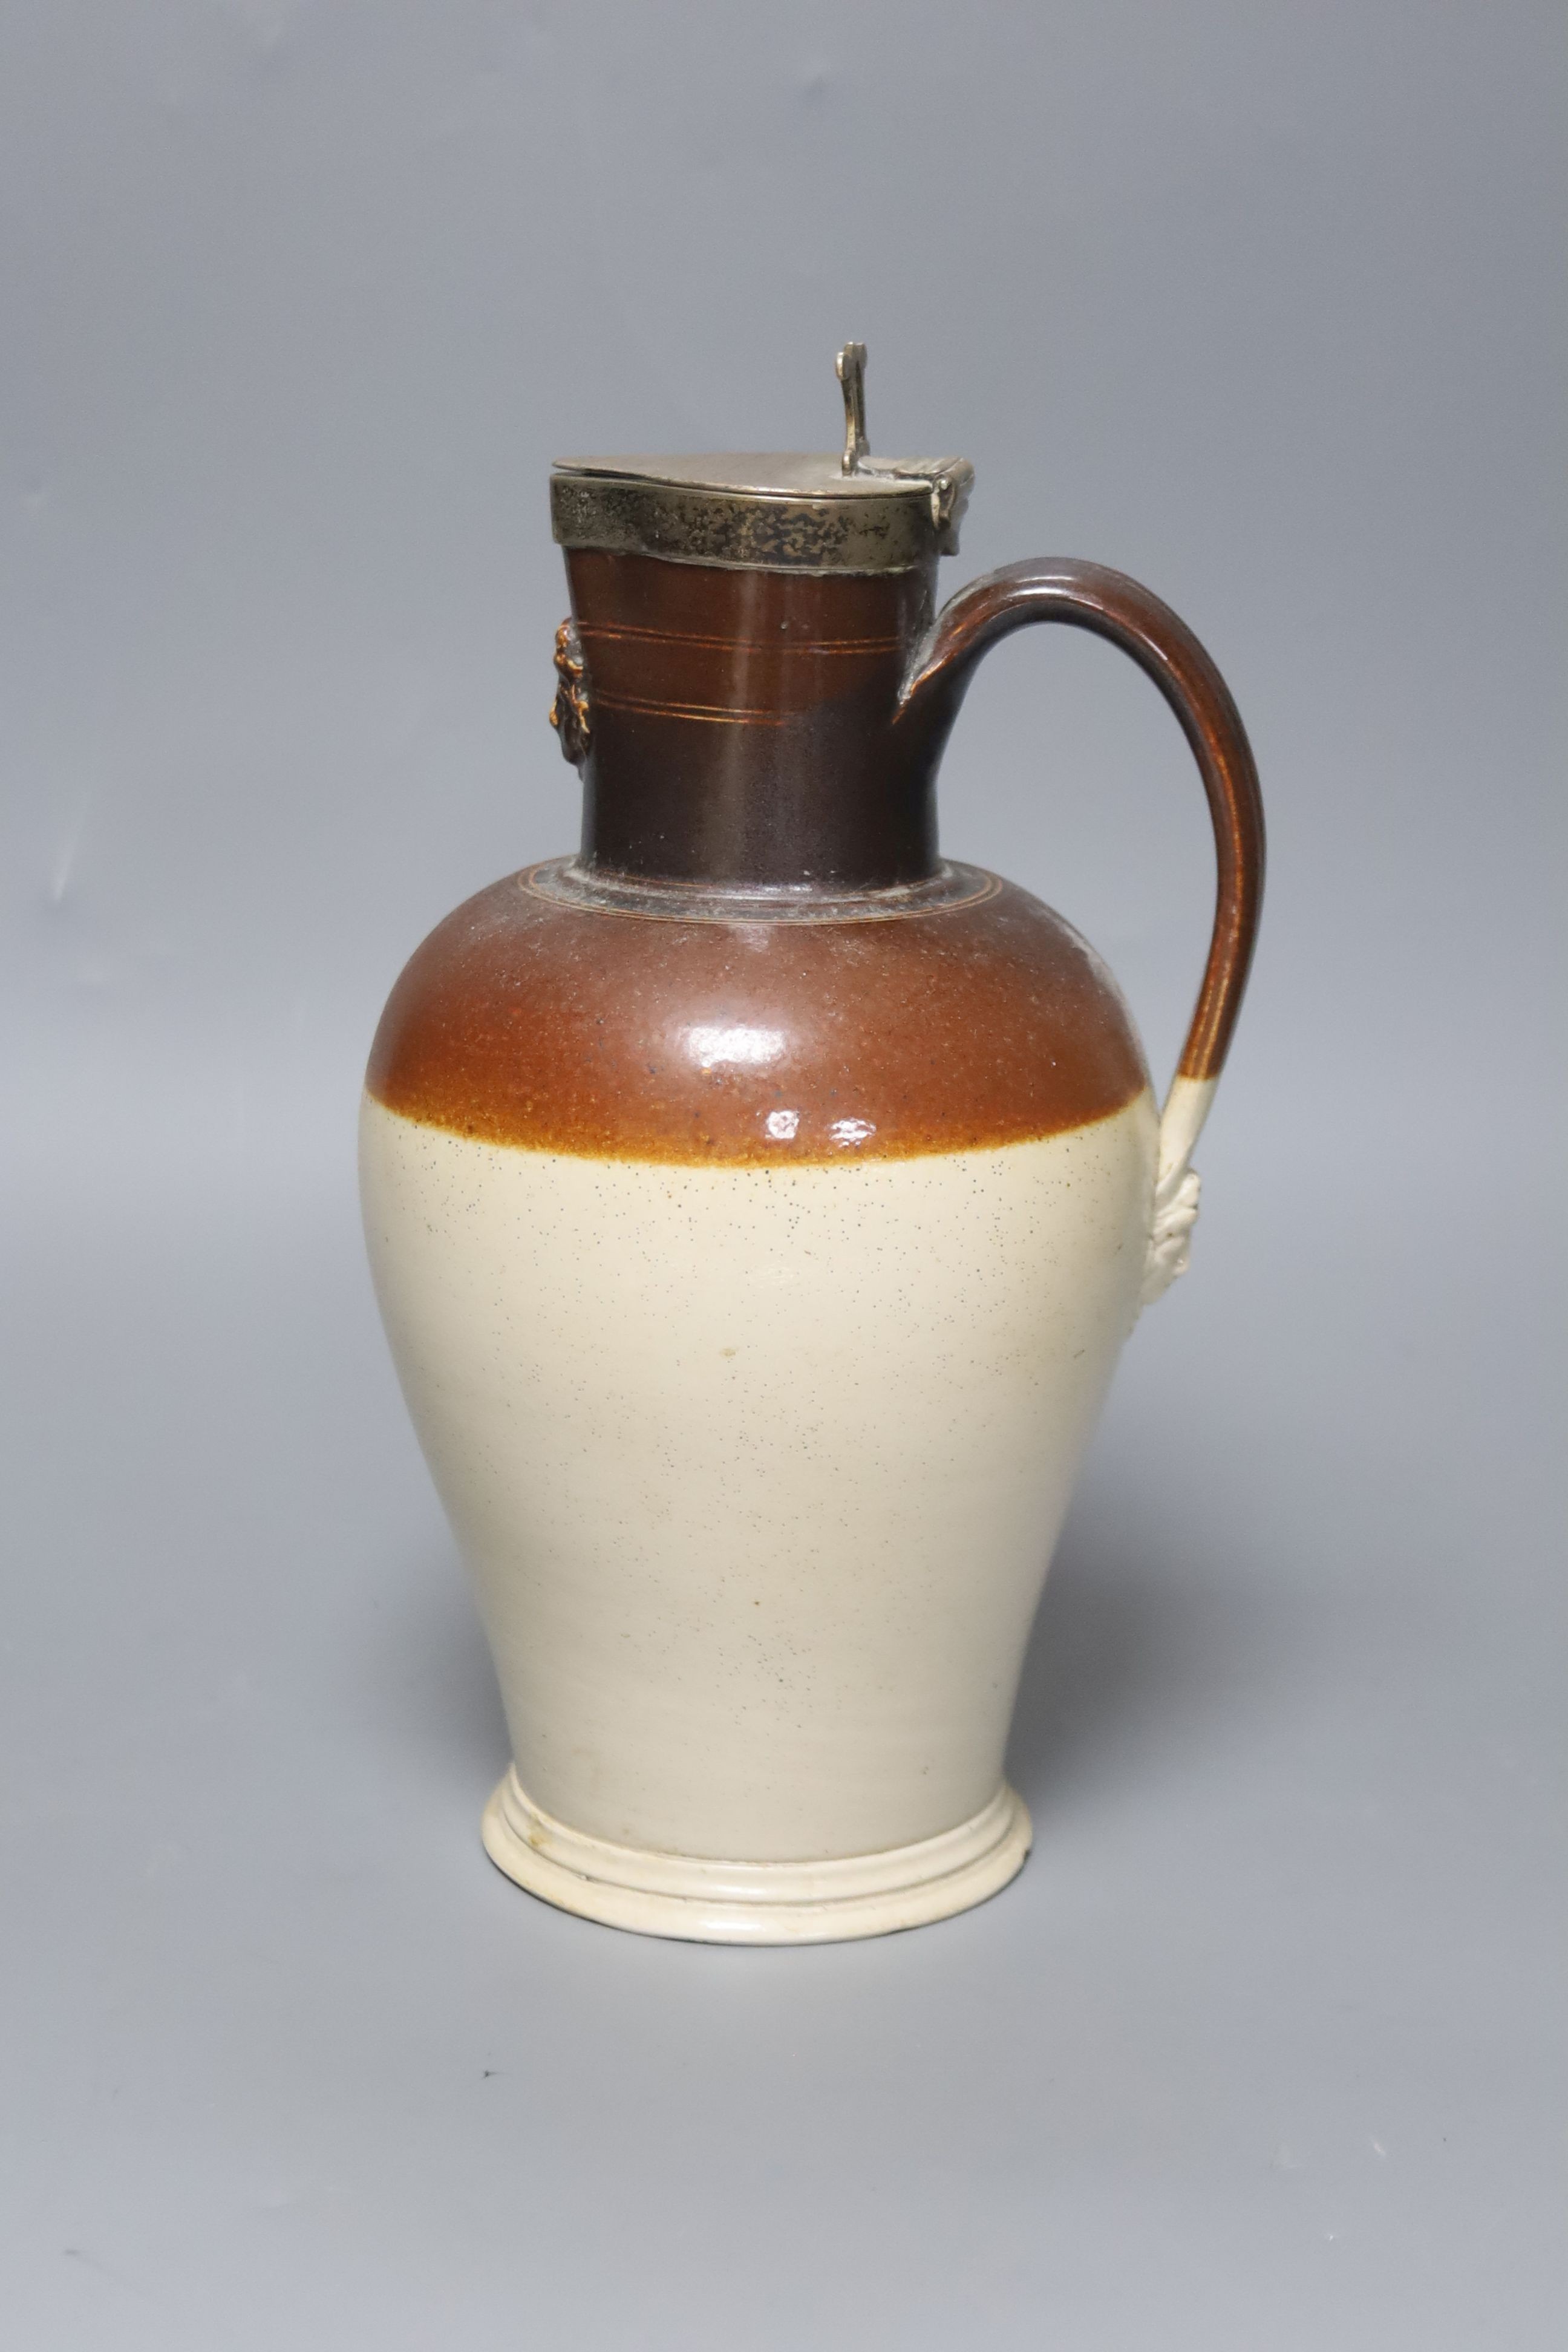 A silver mounted stoneware pitcher ‘presented by Joseph Neeld Esq to Joseph Cirvers 1848’ the base marked ‘Hot water proof’ 26cm